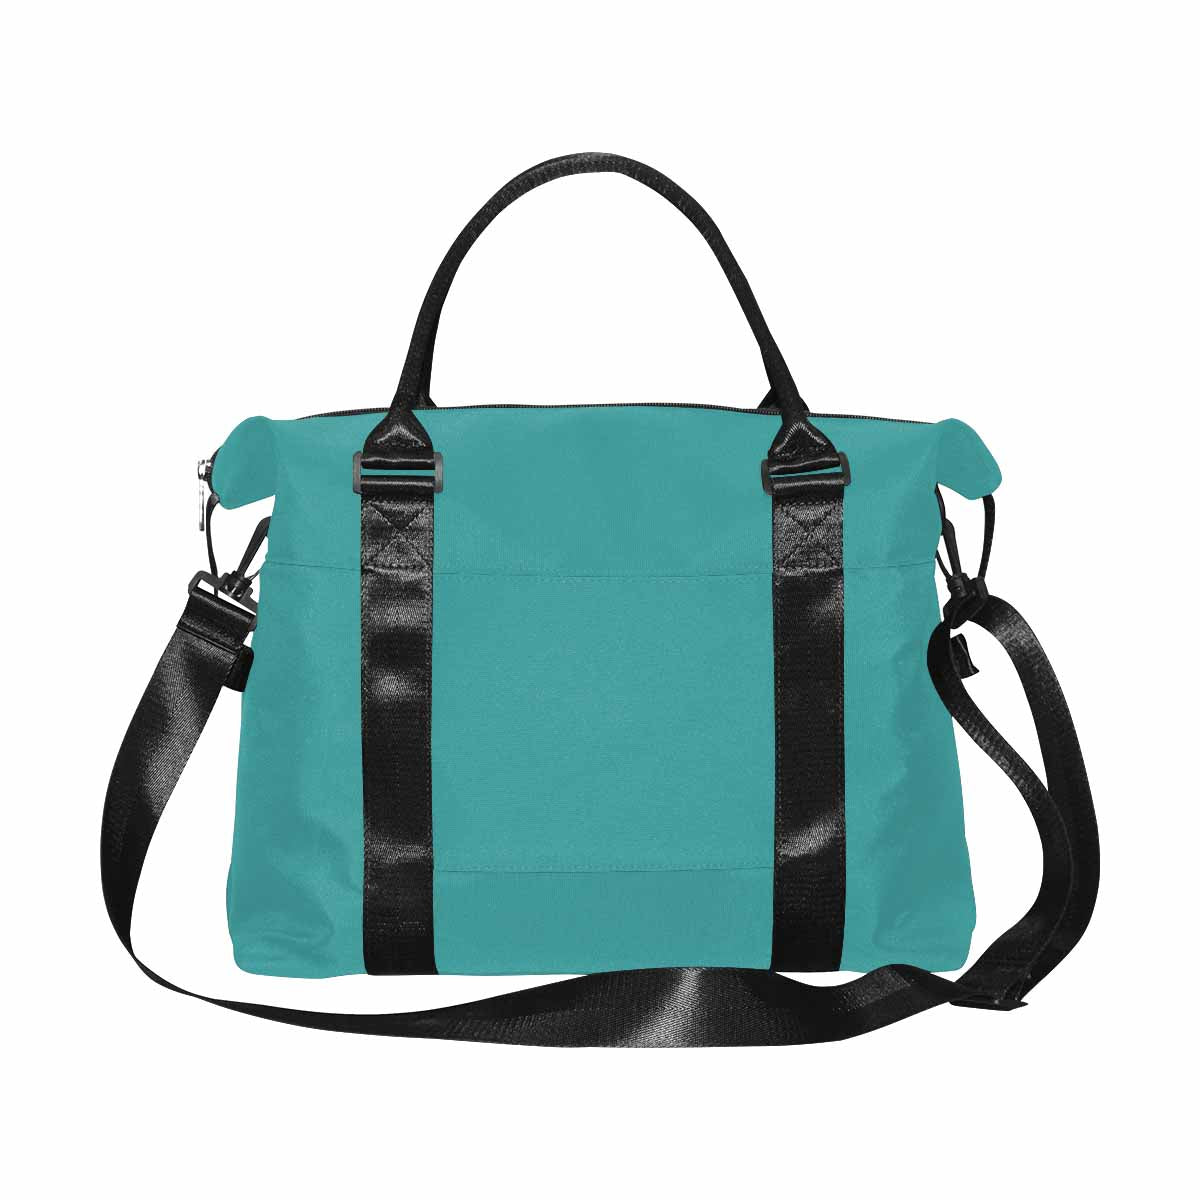 Teal Canvas Carry On